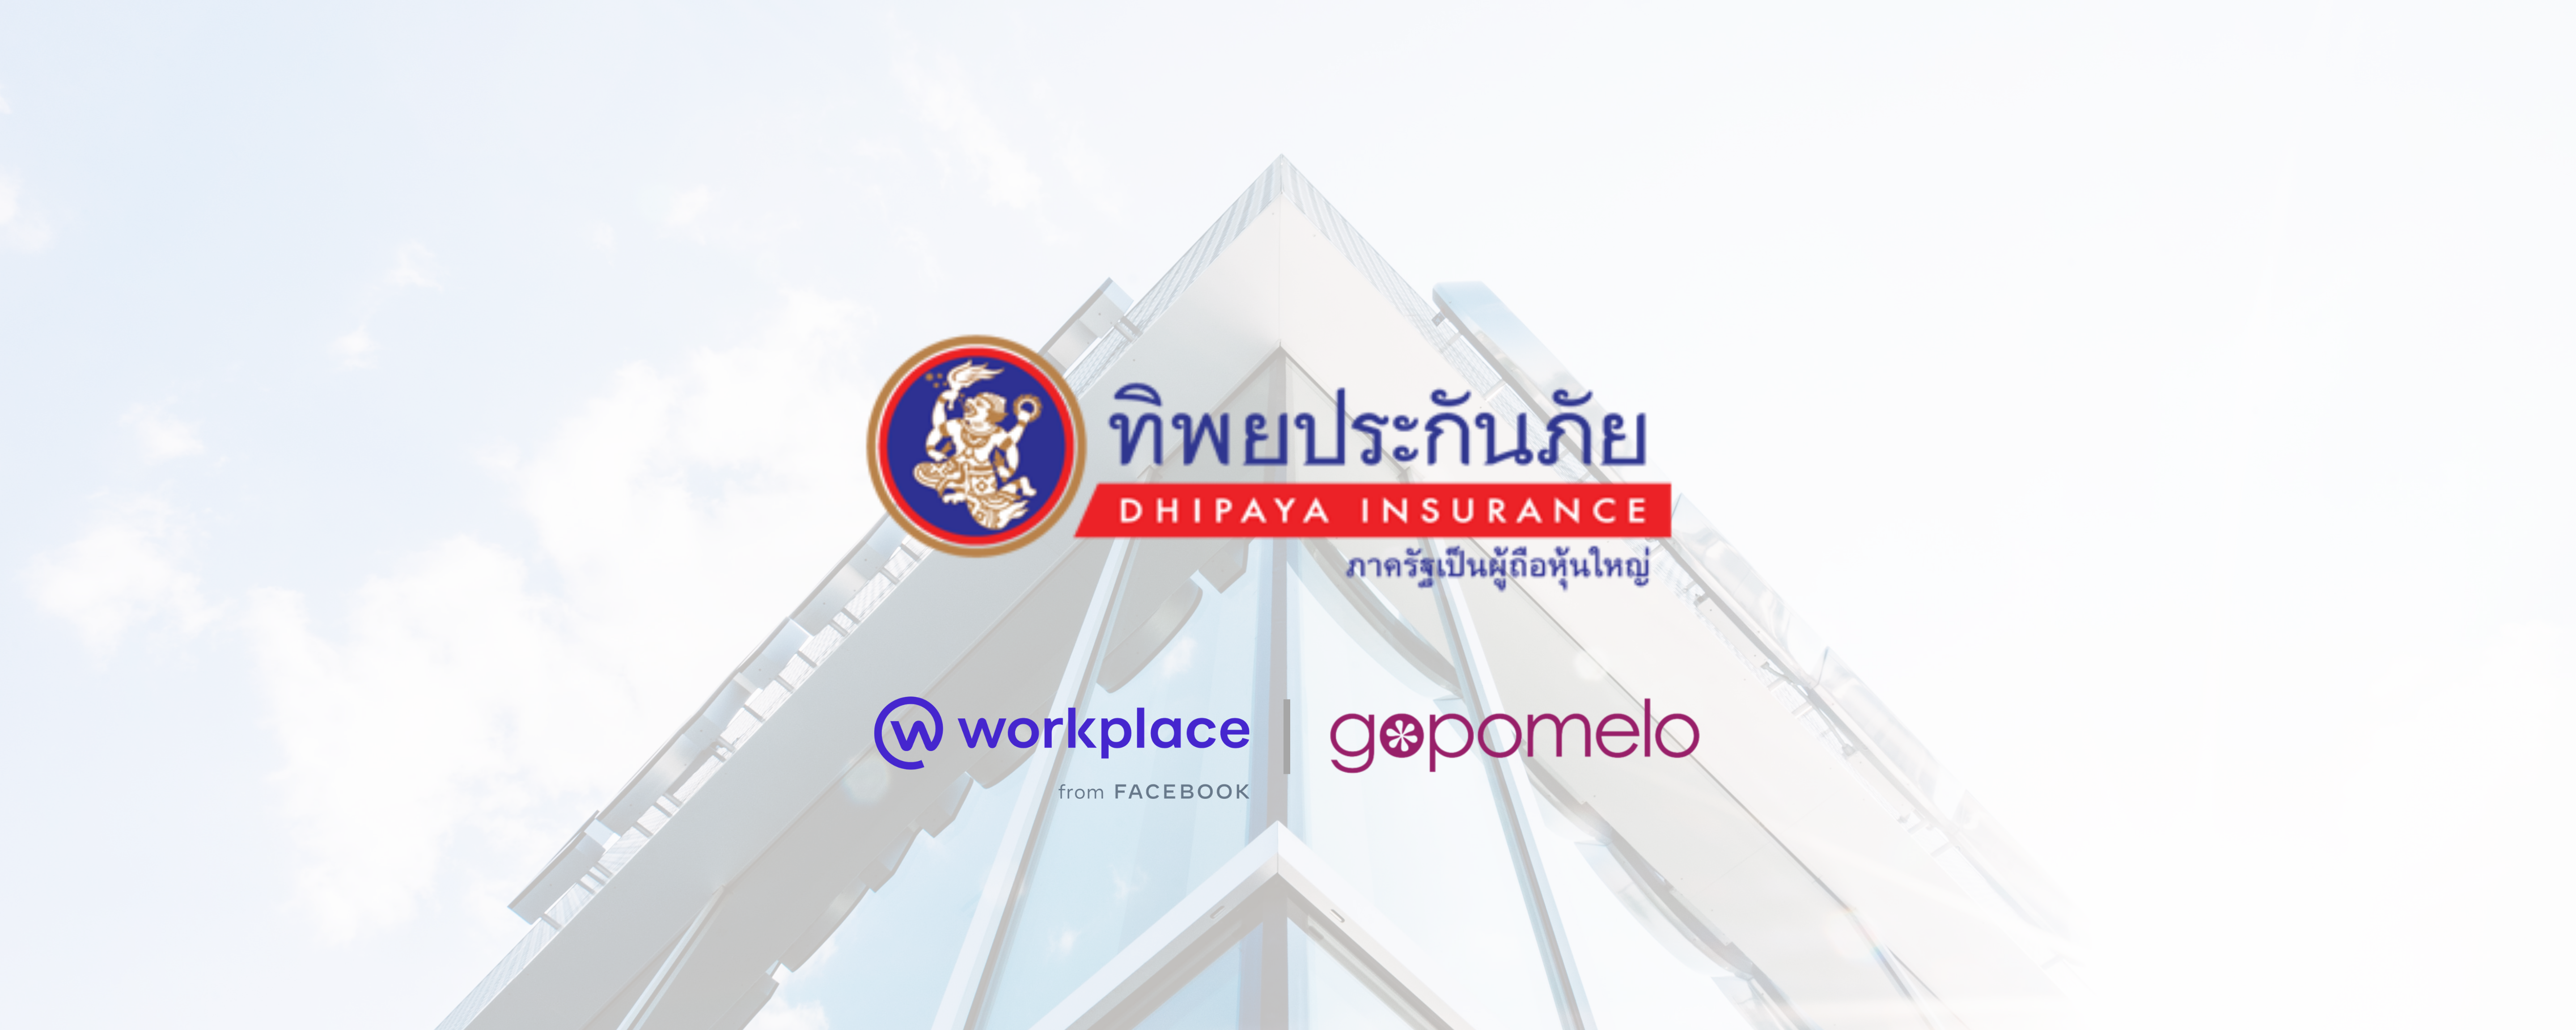 Workplace: Dhipaya Shared their Thoughts about Workplace from Facebook and GoPomelo